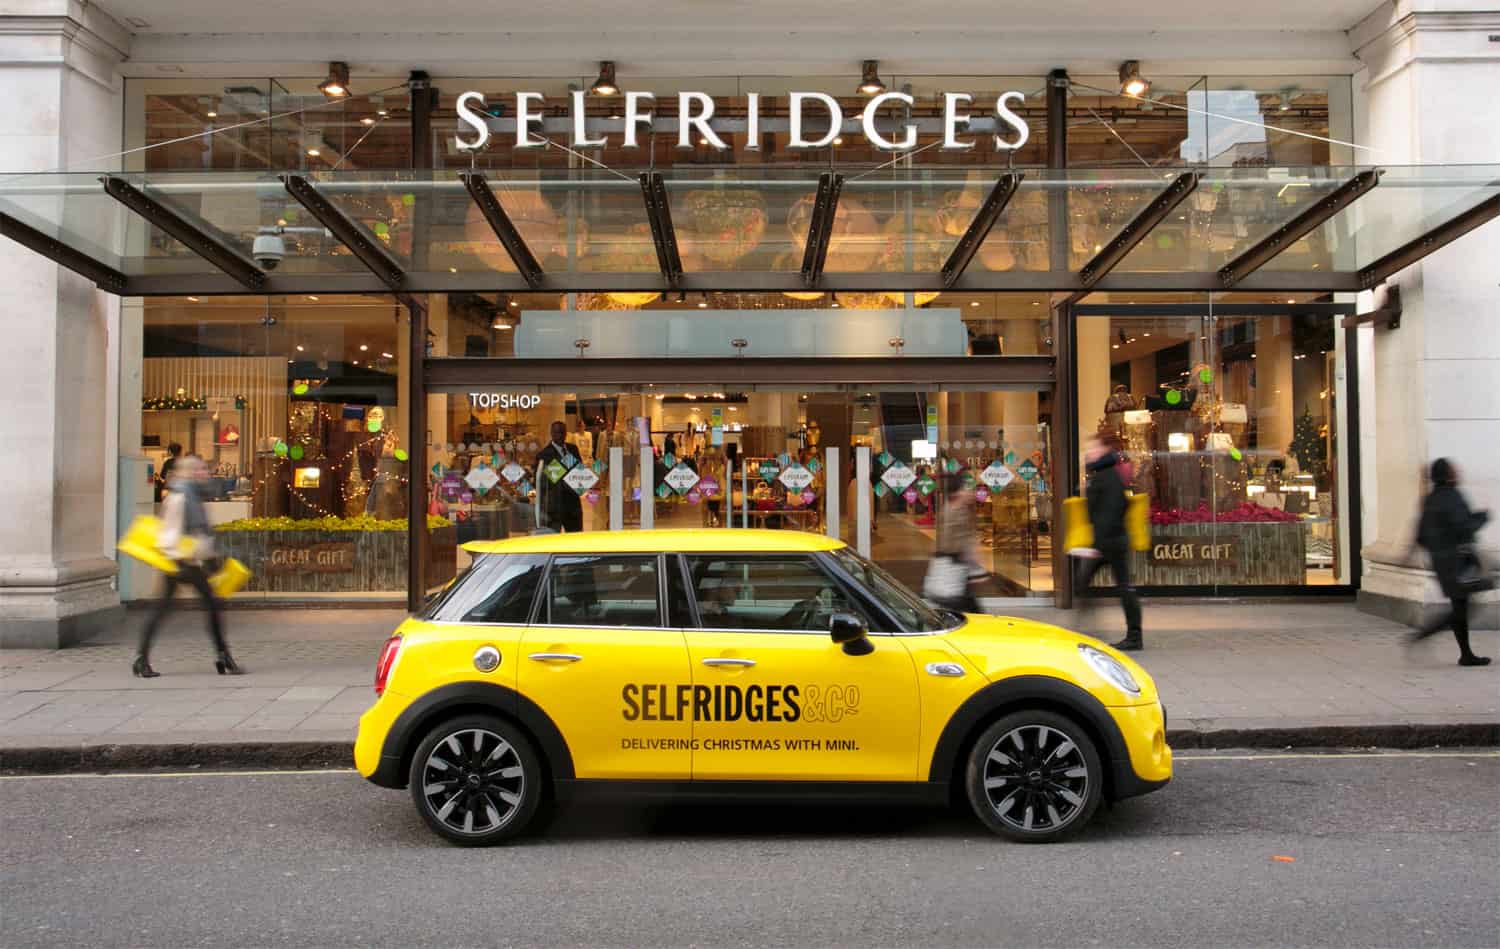 Selfridges to sell to Thai business